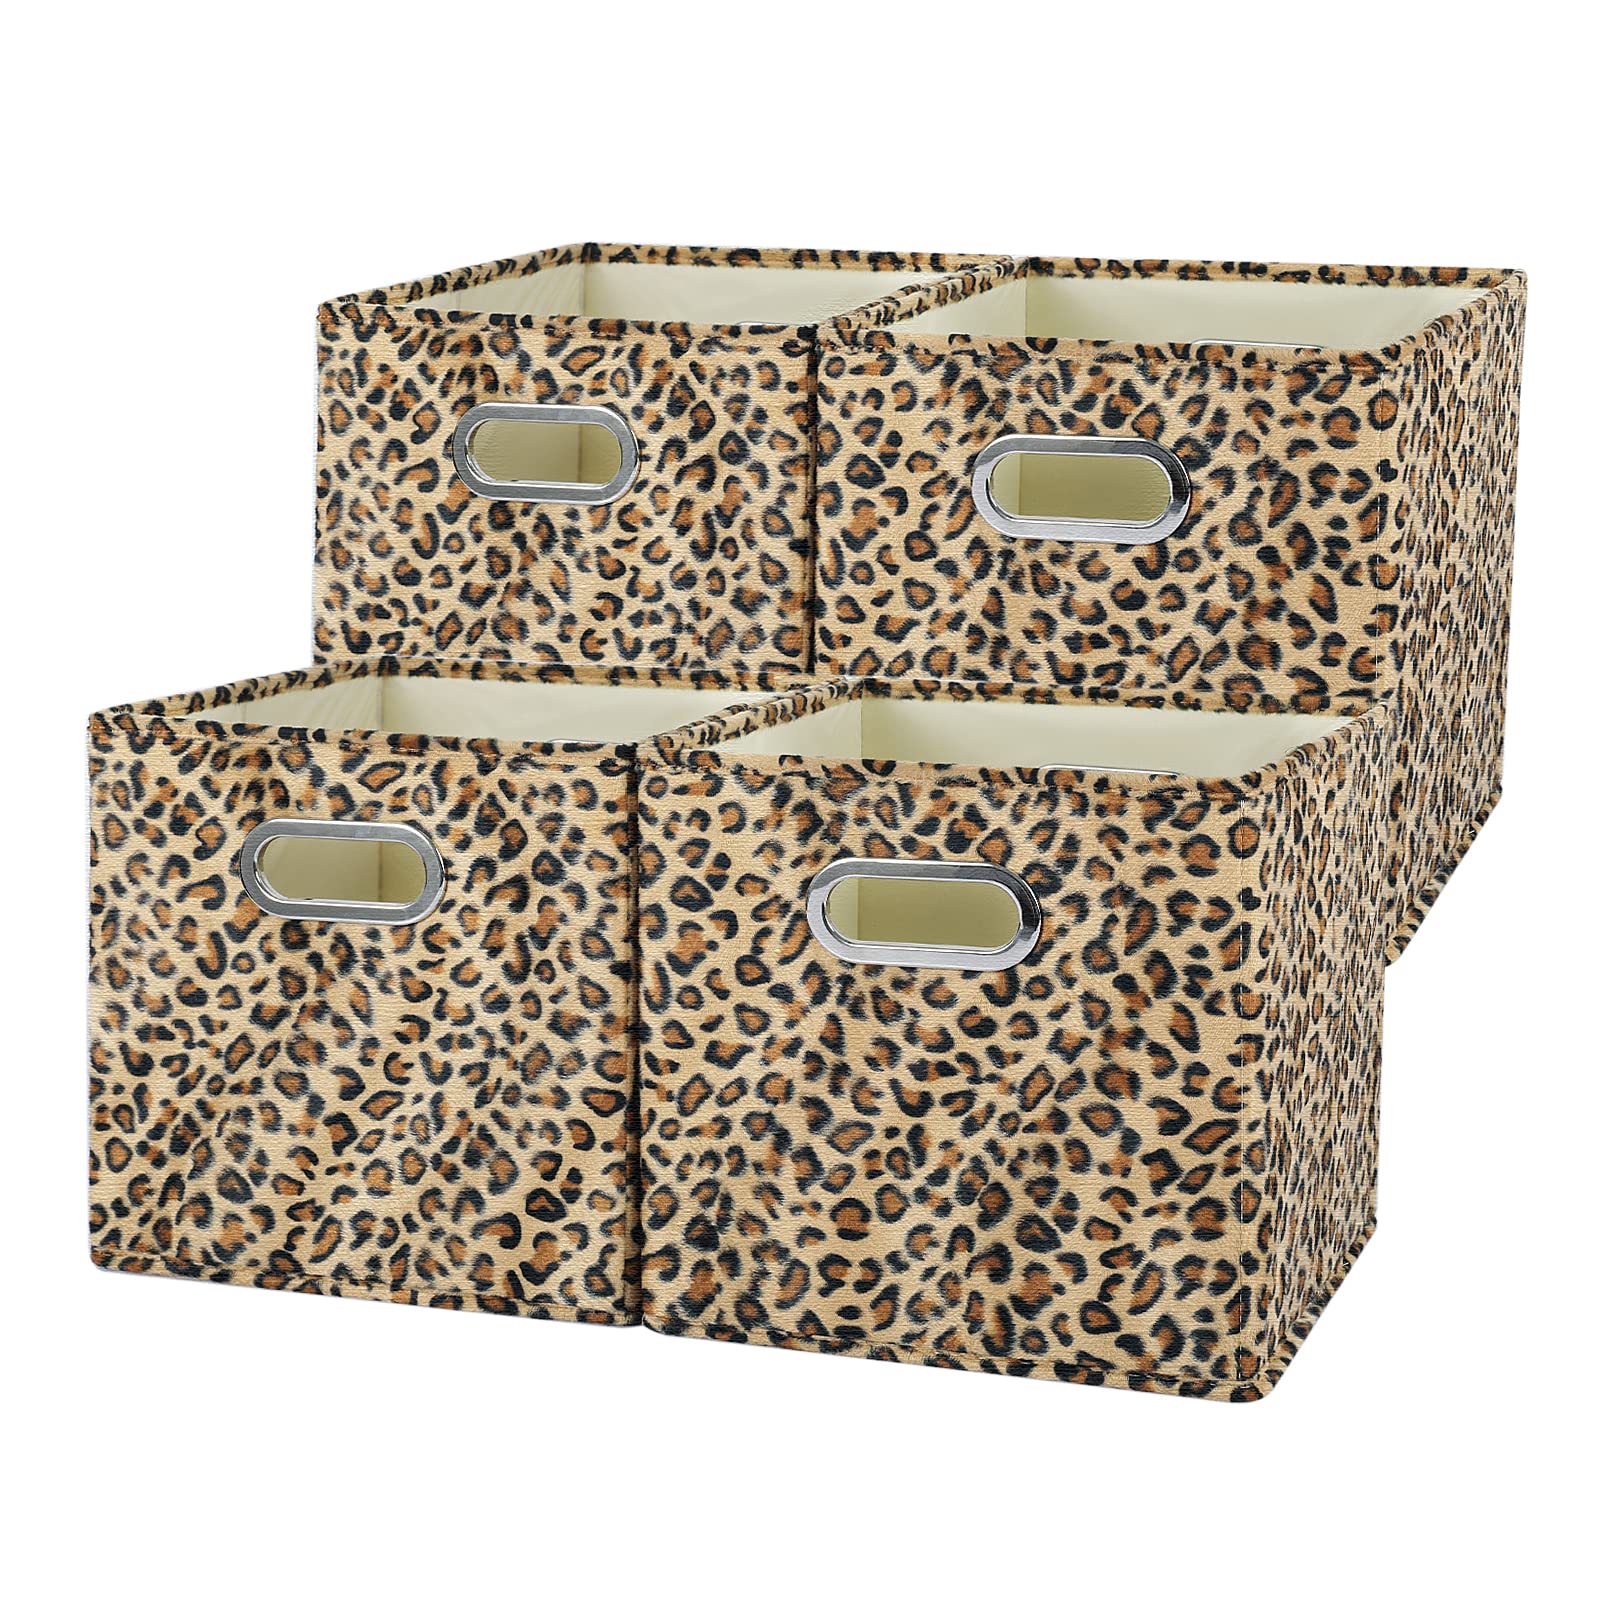 ANMINY 4PCS Storage Cube Set Leopard Print Large Velvet Fabric Storage Bins Boxes Baskets with Handles PP Plastic Board Foldable Closet Shelf Organizer Container for Home Office - Brown, 11"x 11"x 11"